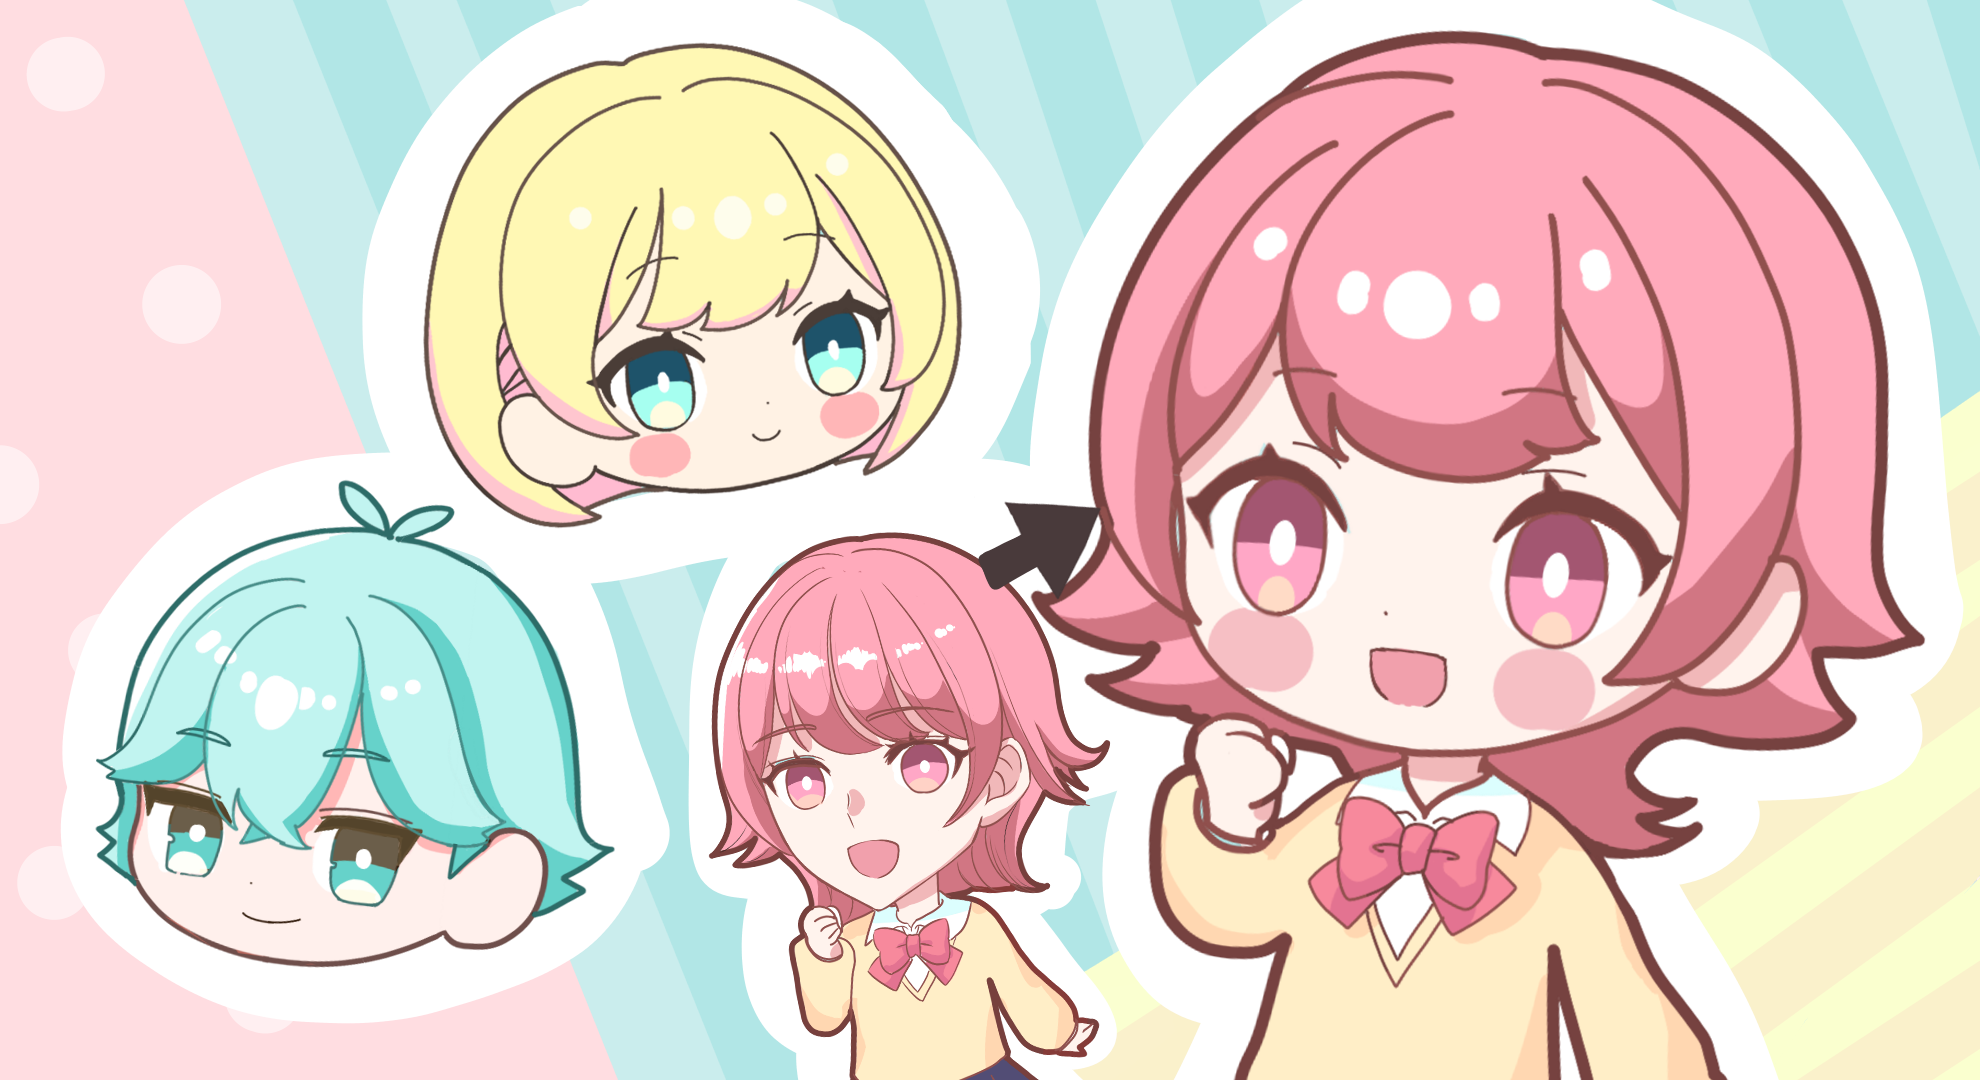 THE BEST WAY to POSE Chibi Characters by MariaMediaHere - Make better art